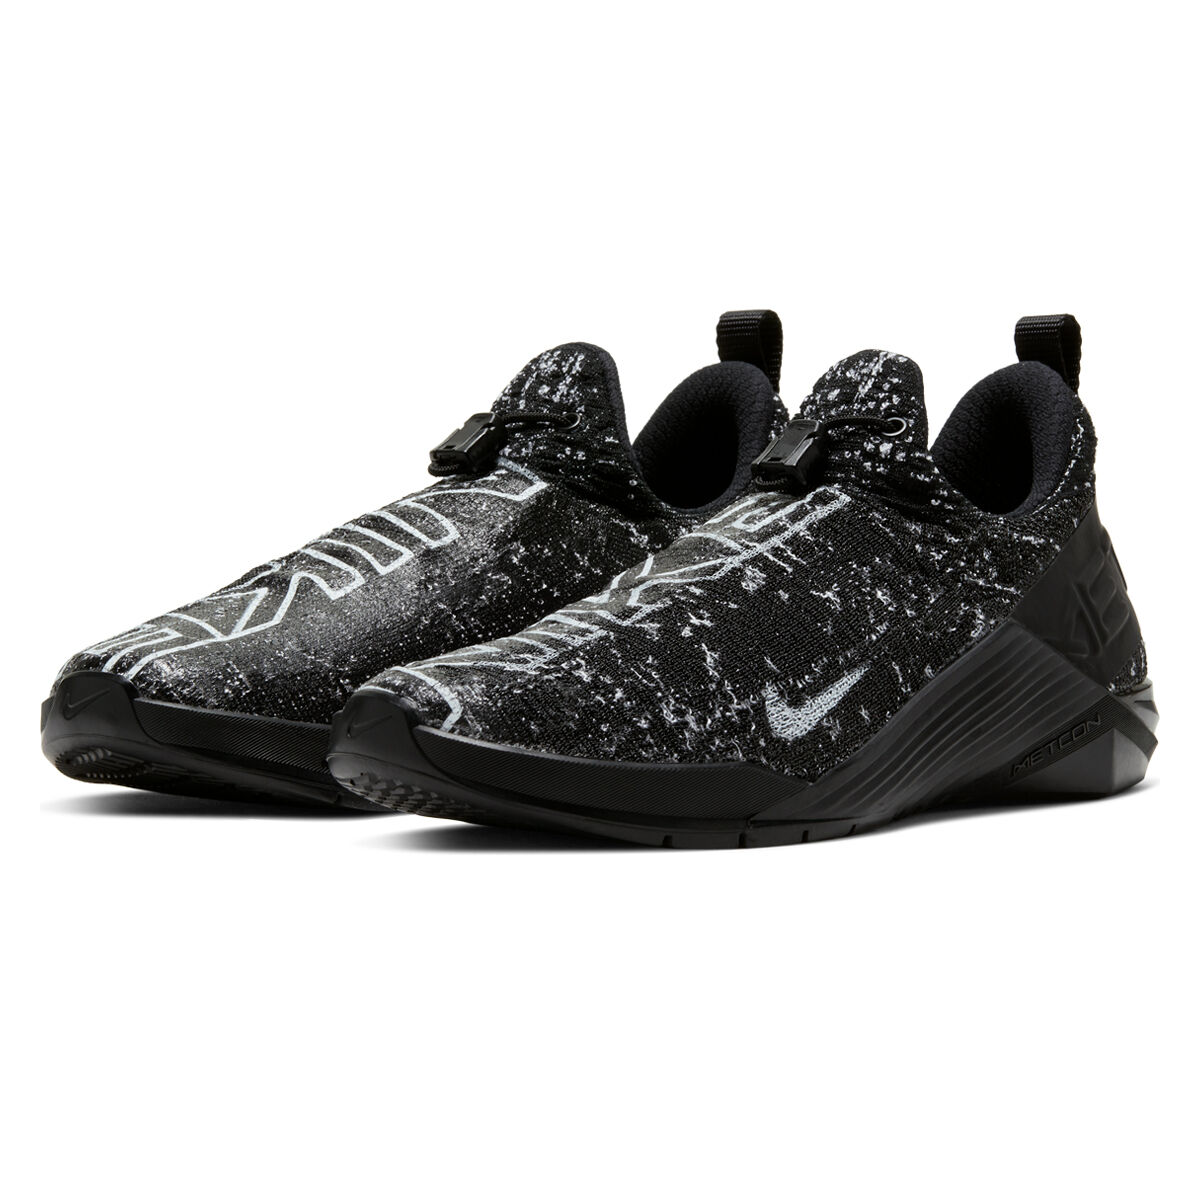 nike metcon 4 afterpay